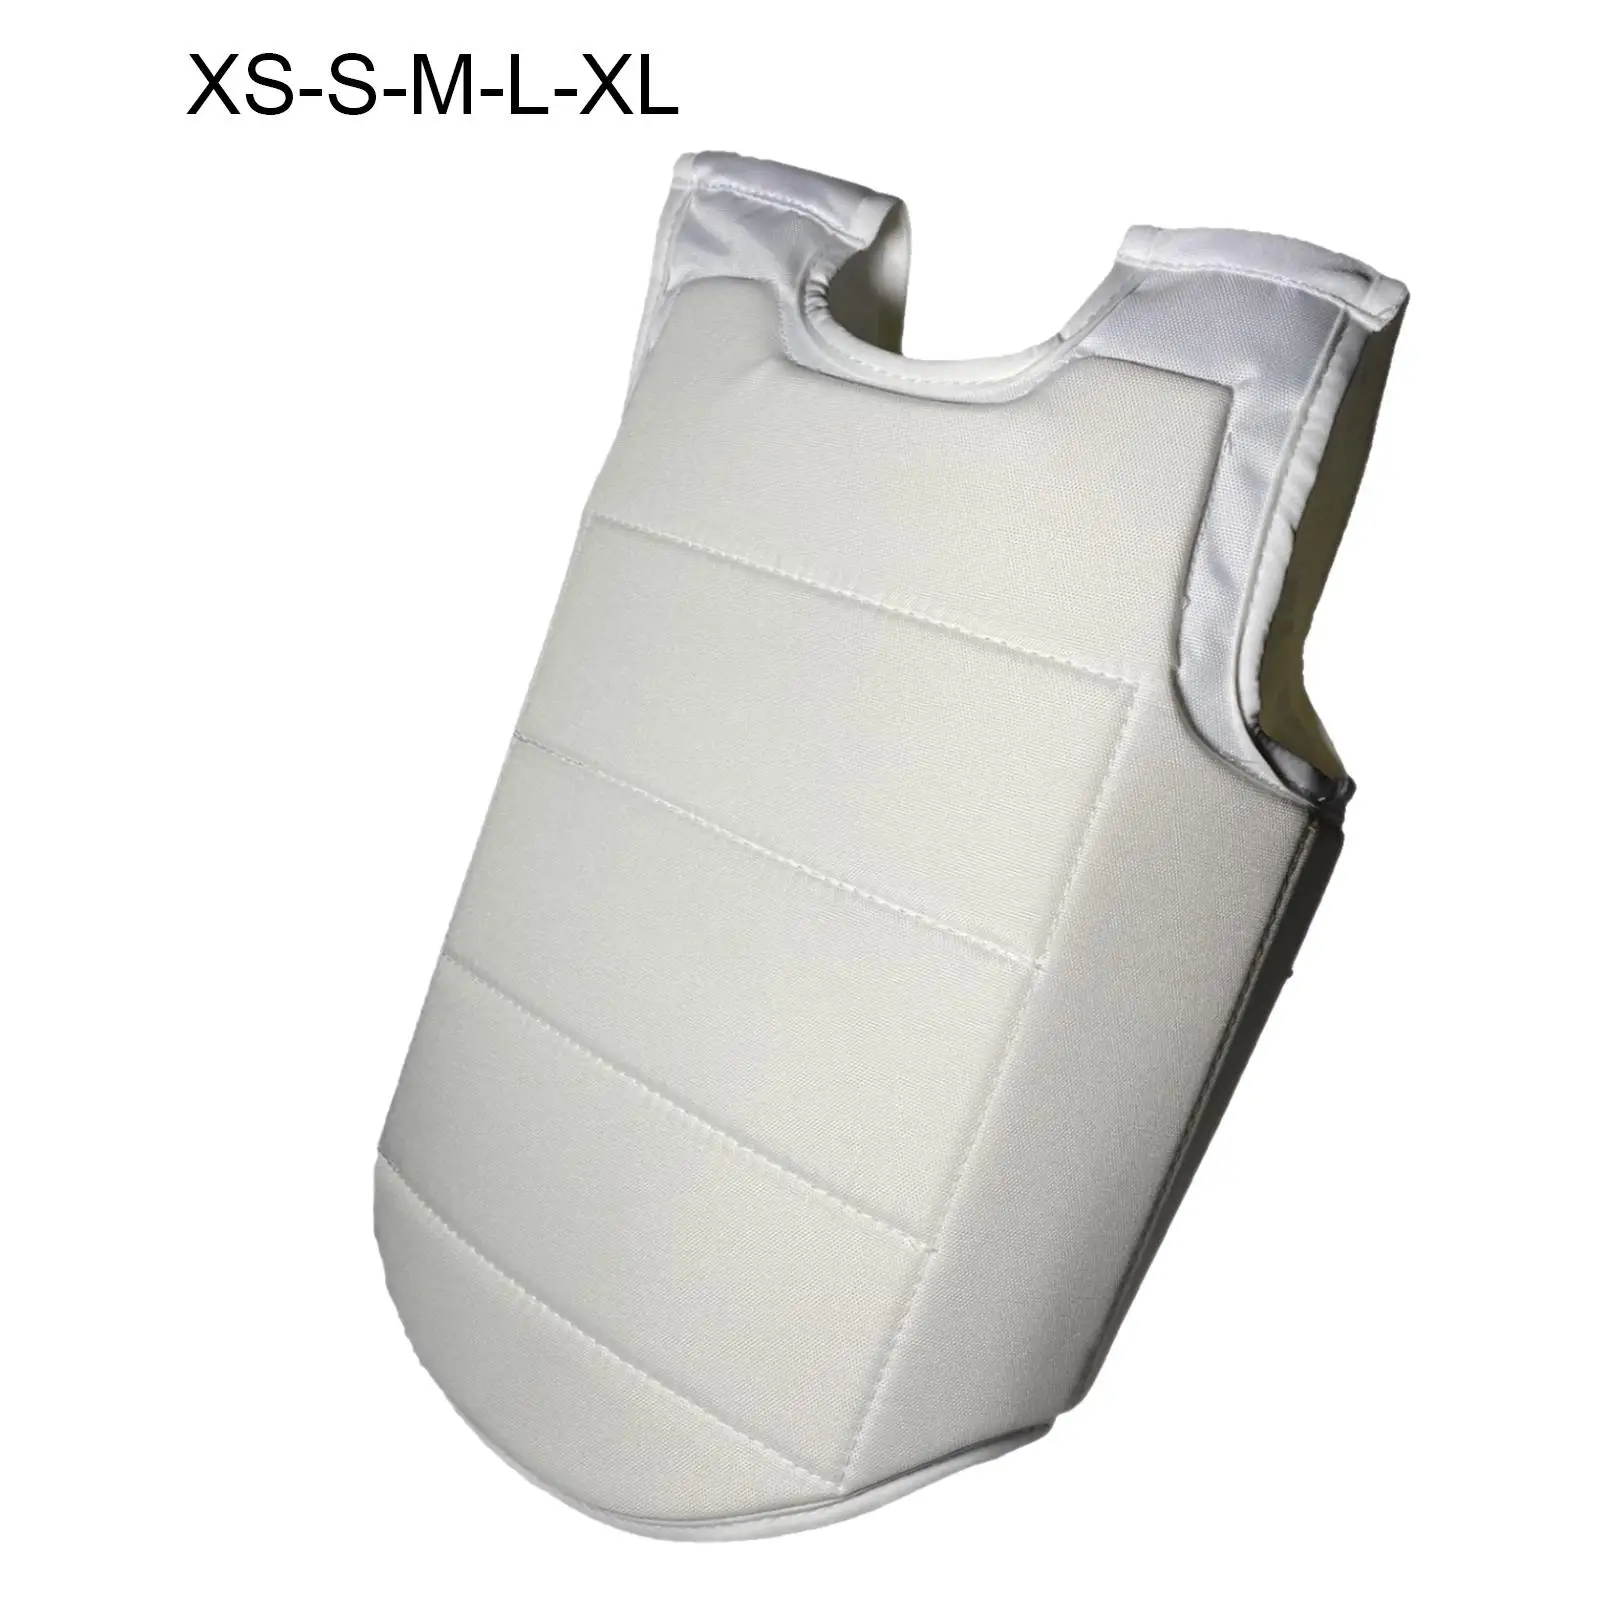 Karate Chest Protector Chest Guard Belly Ribs Protection Pad Body Protector for Men Women Children